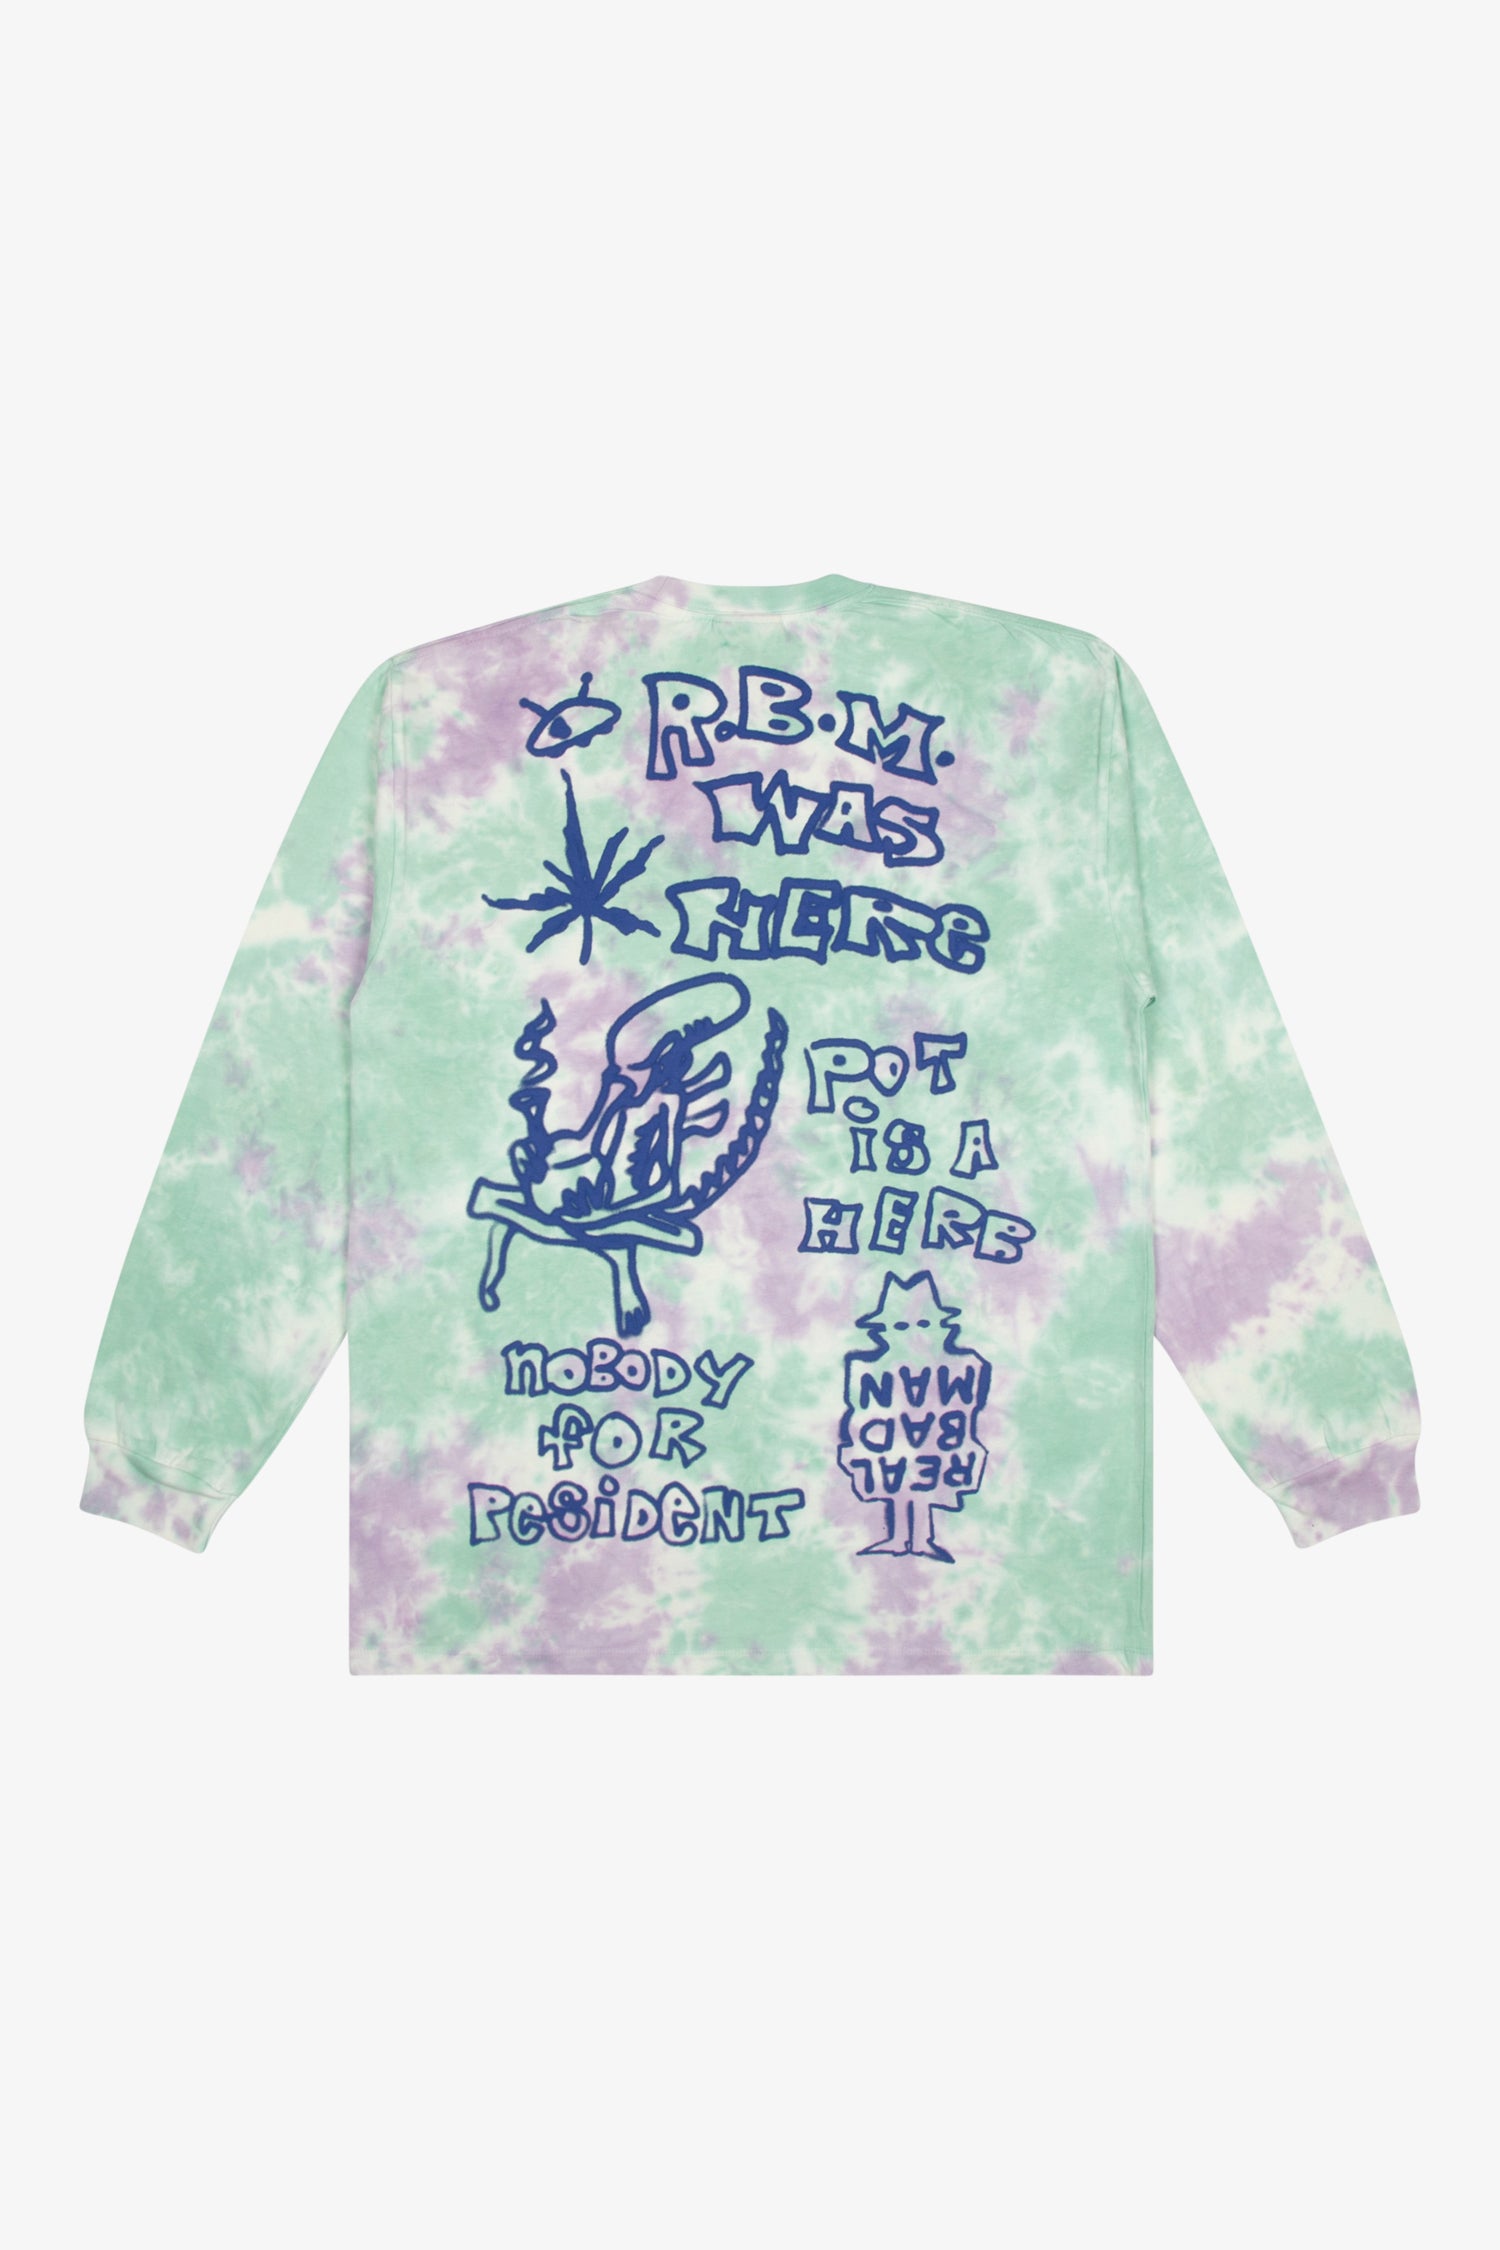 Youth Party Long Sleeve Tee- Selectshop FRAME